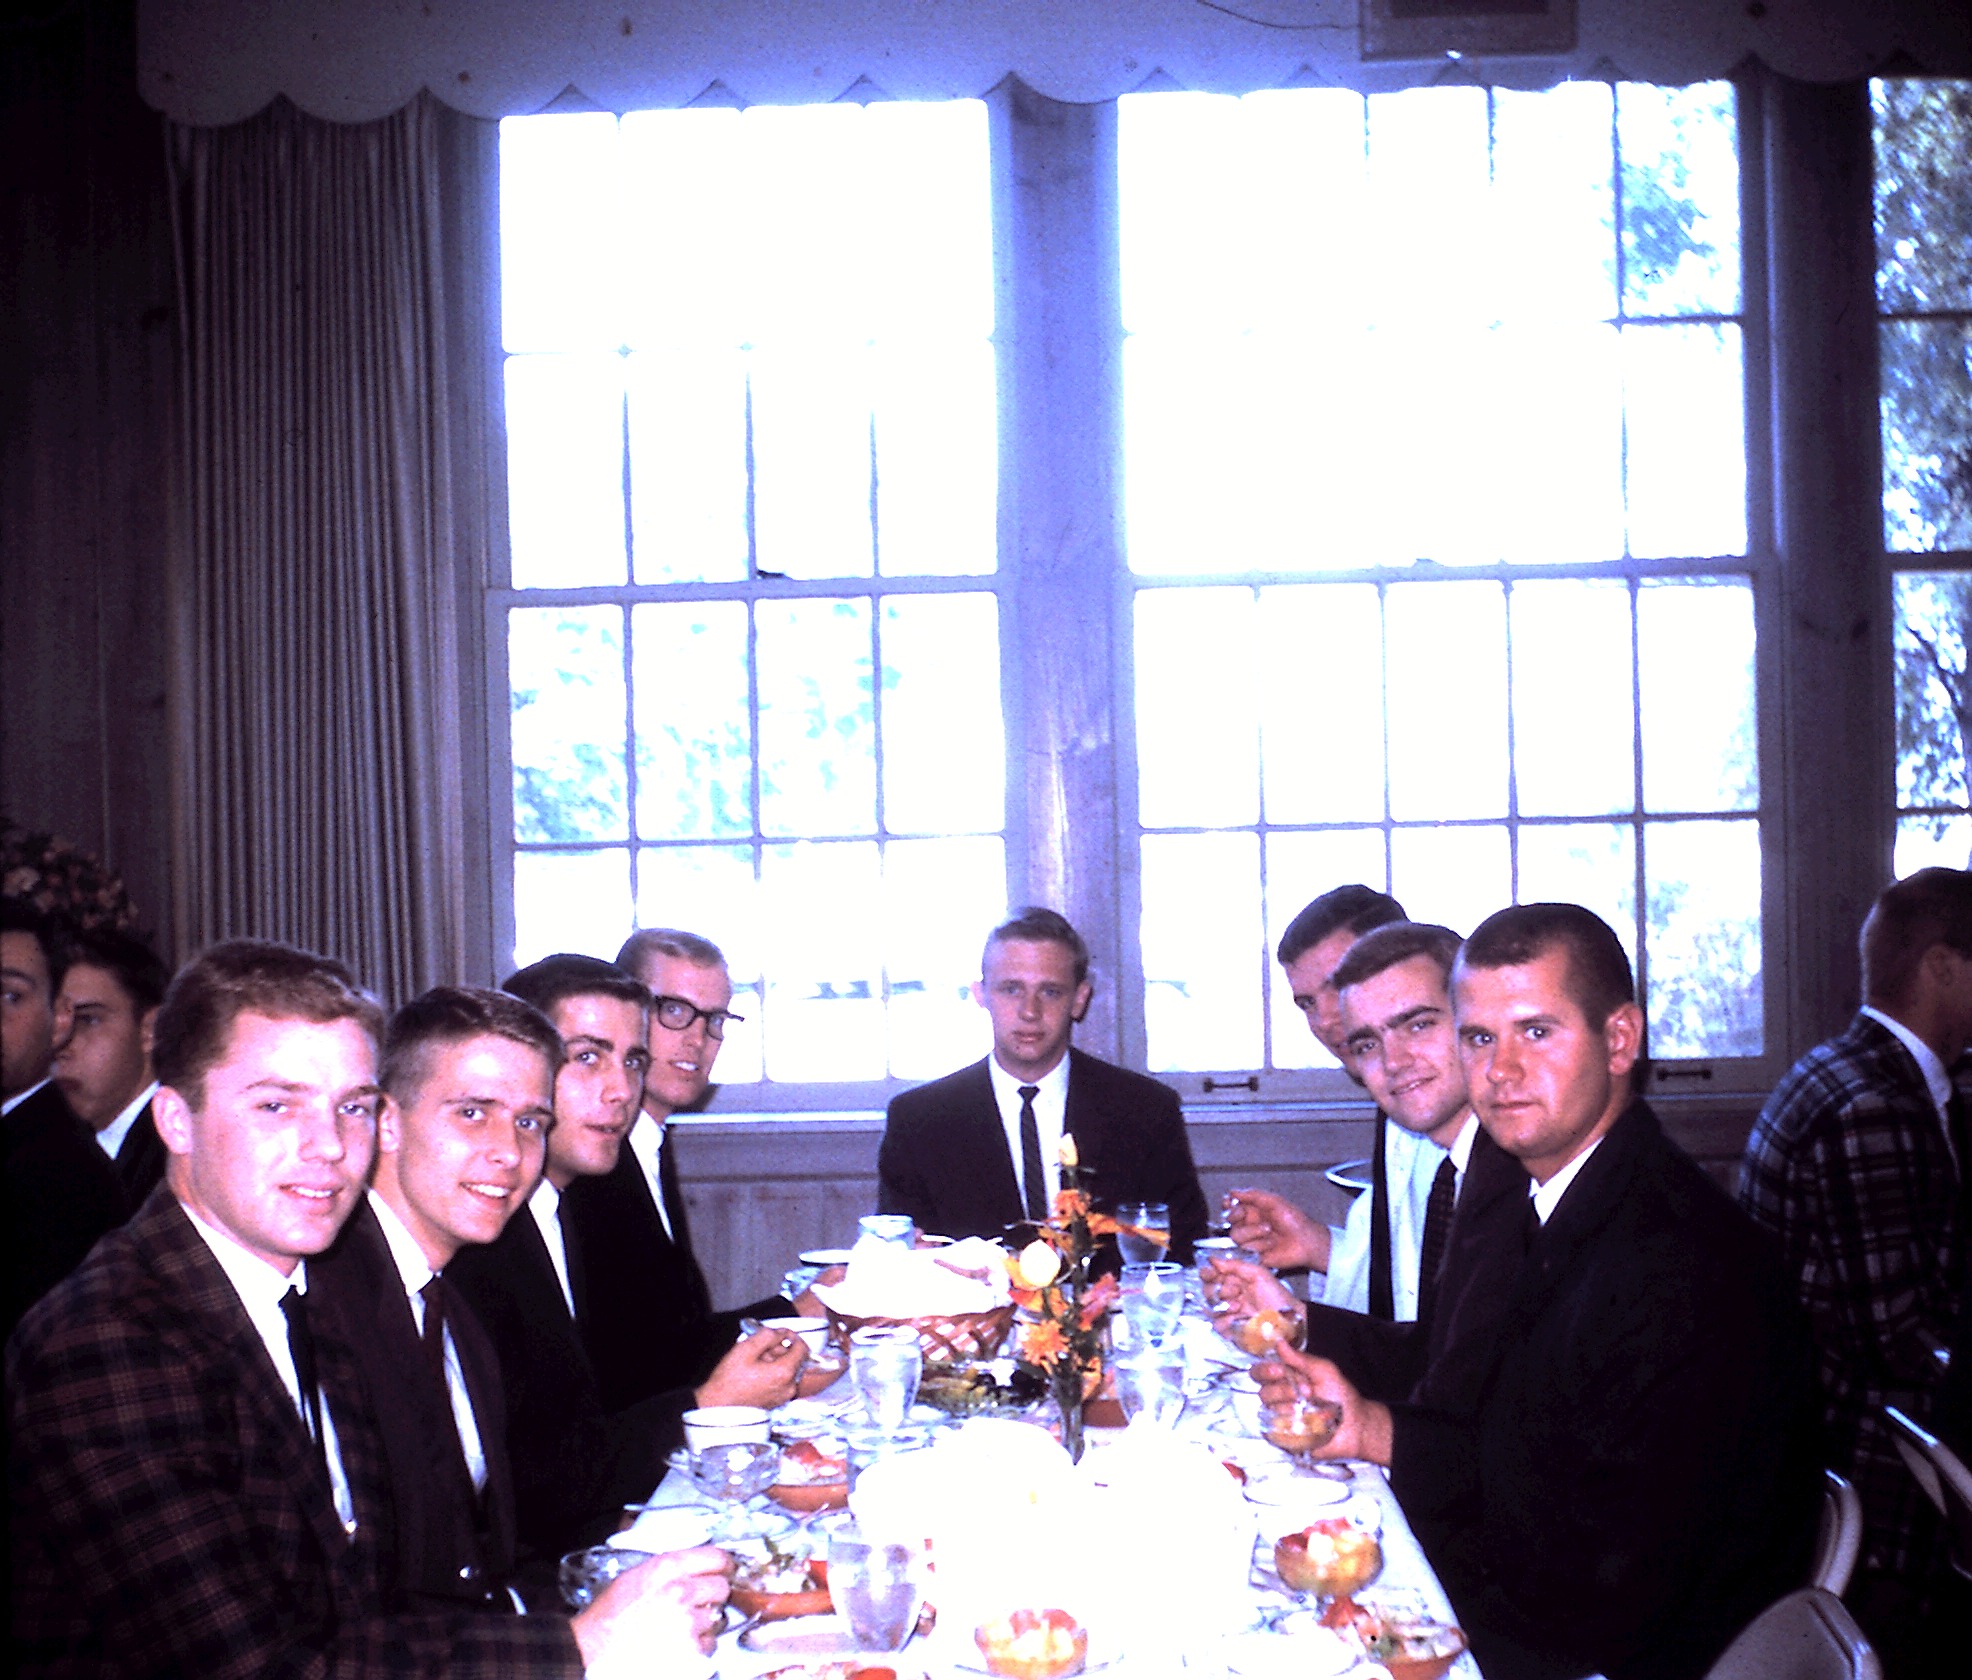  Sigma members at an Initiation banquet, 1963 